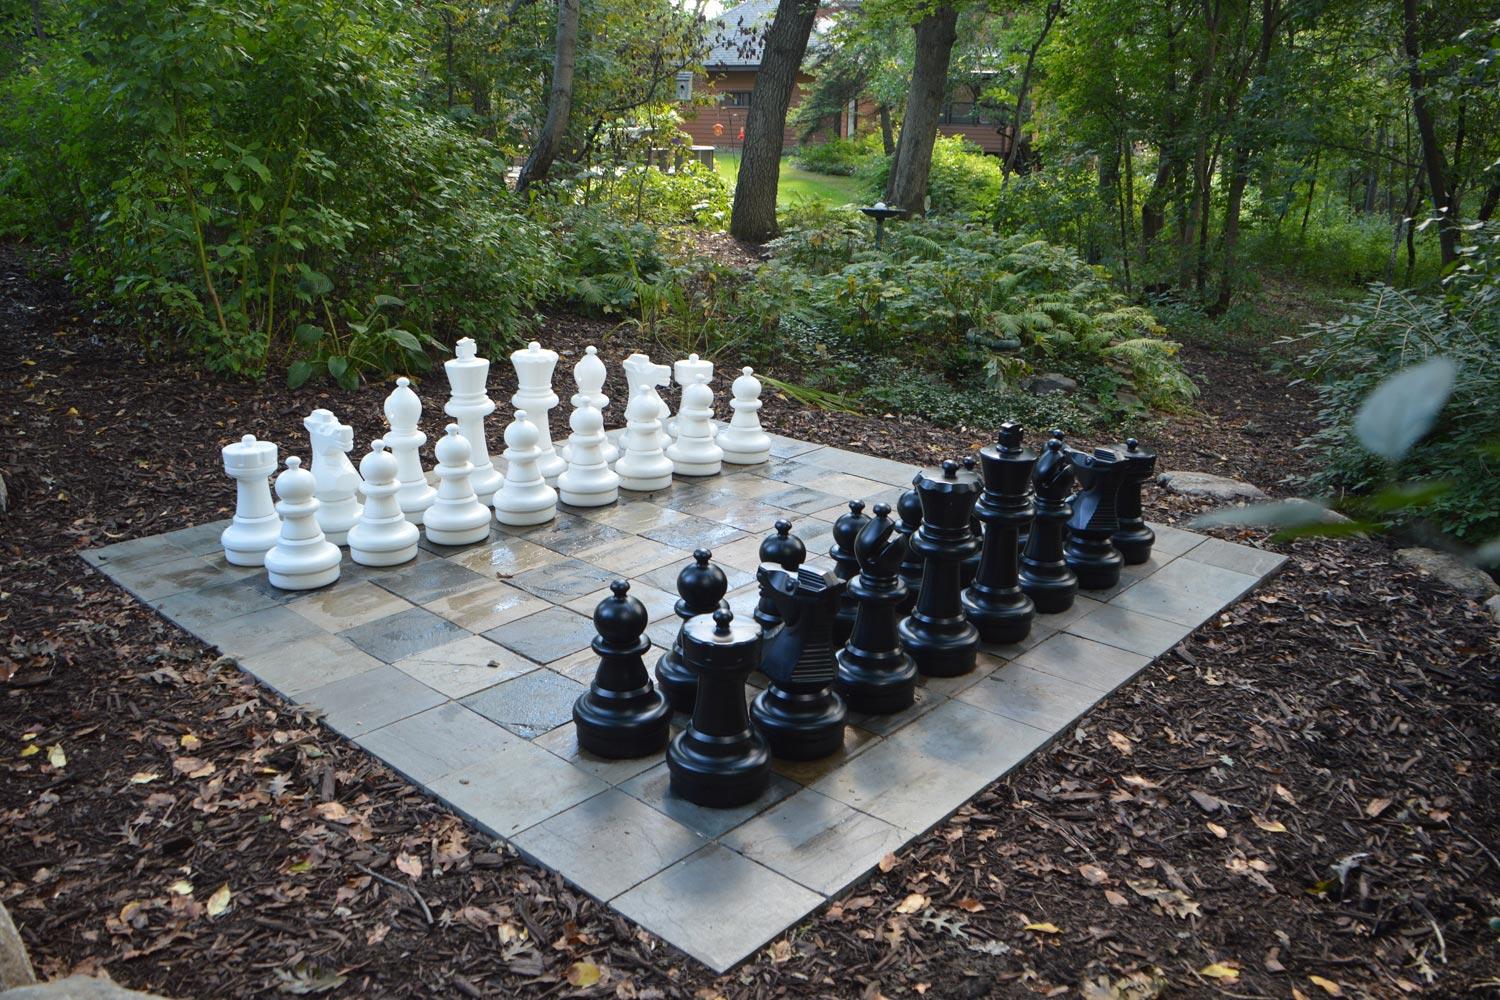 Magical life-sized chessboard in the woods.